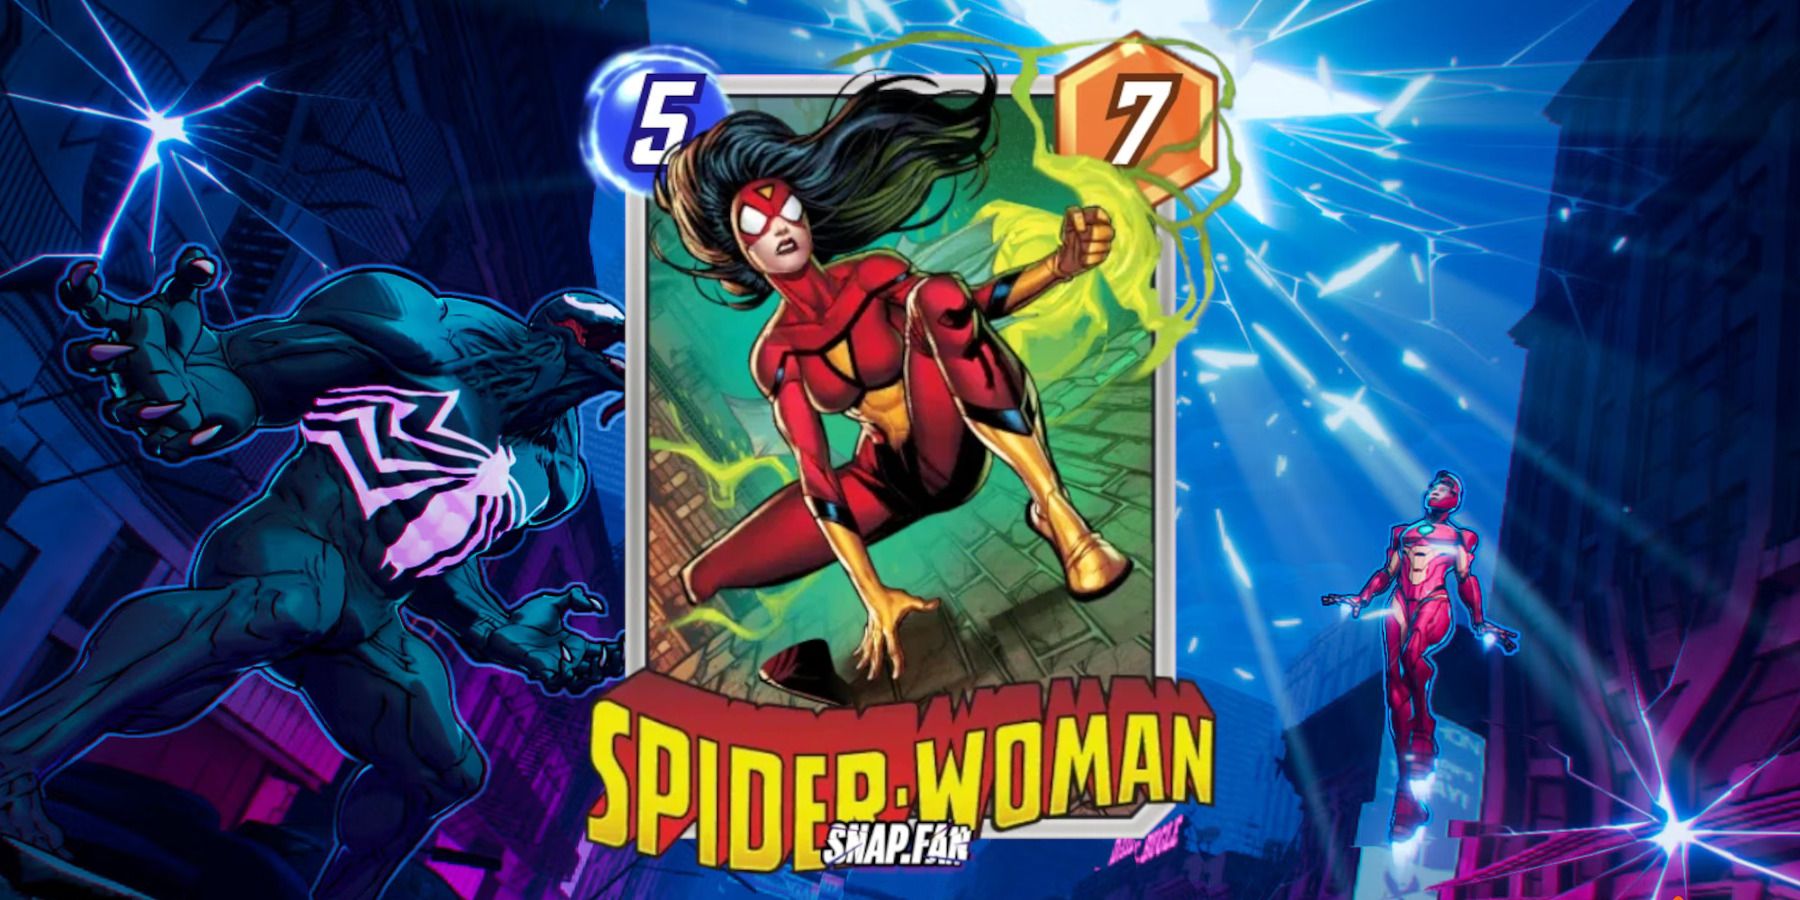 The Spider-Woman card in Marvel Snap on top of promotional art for the game